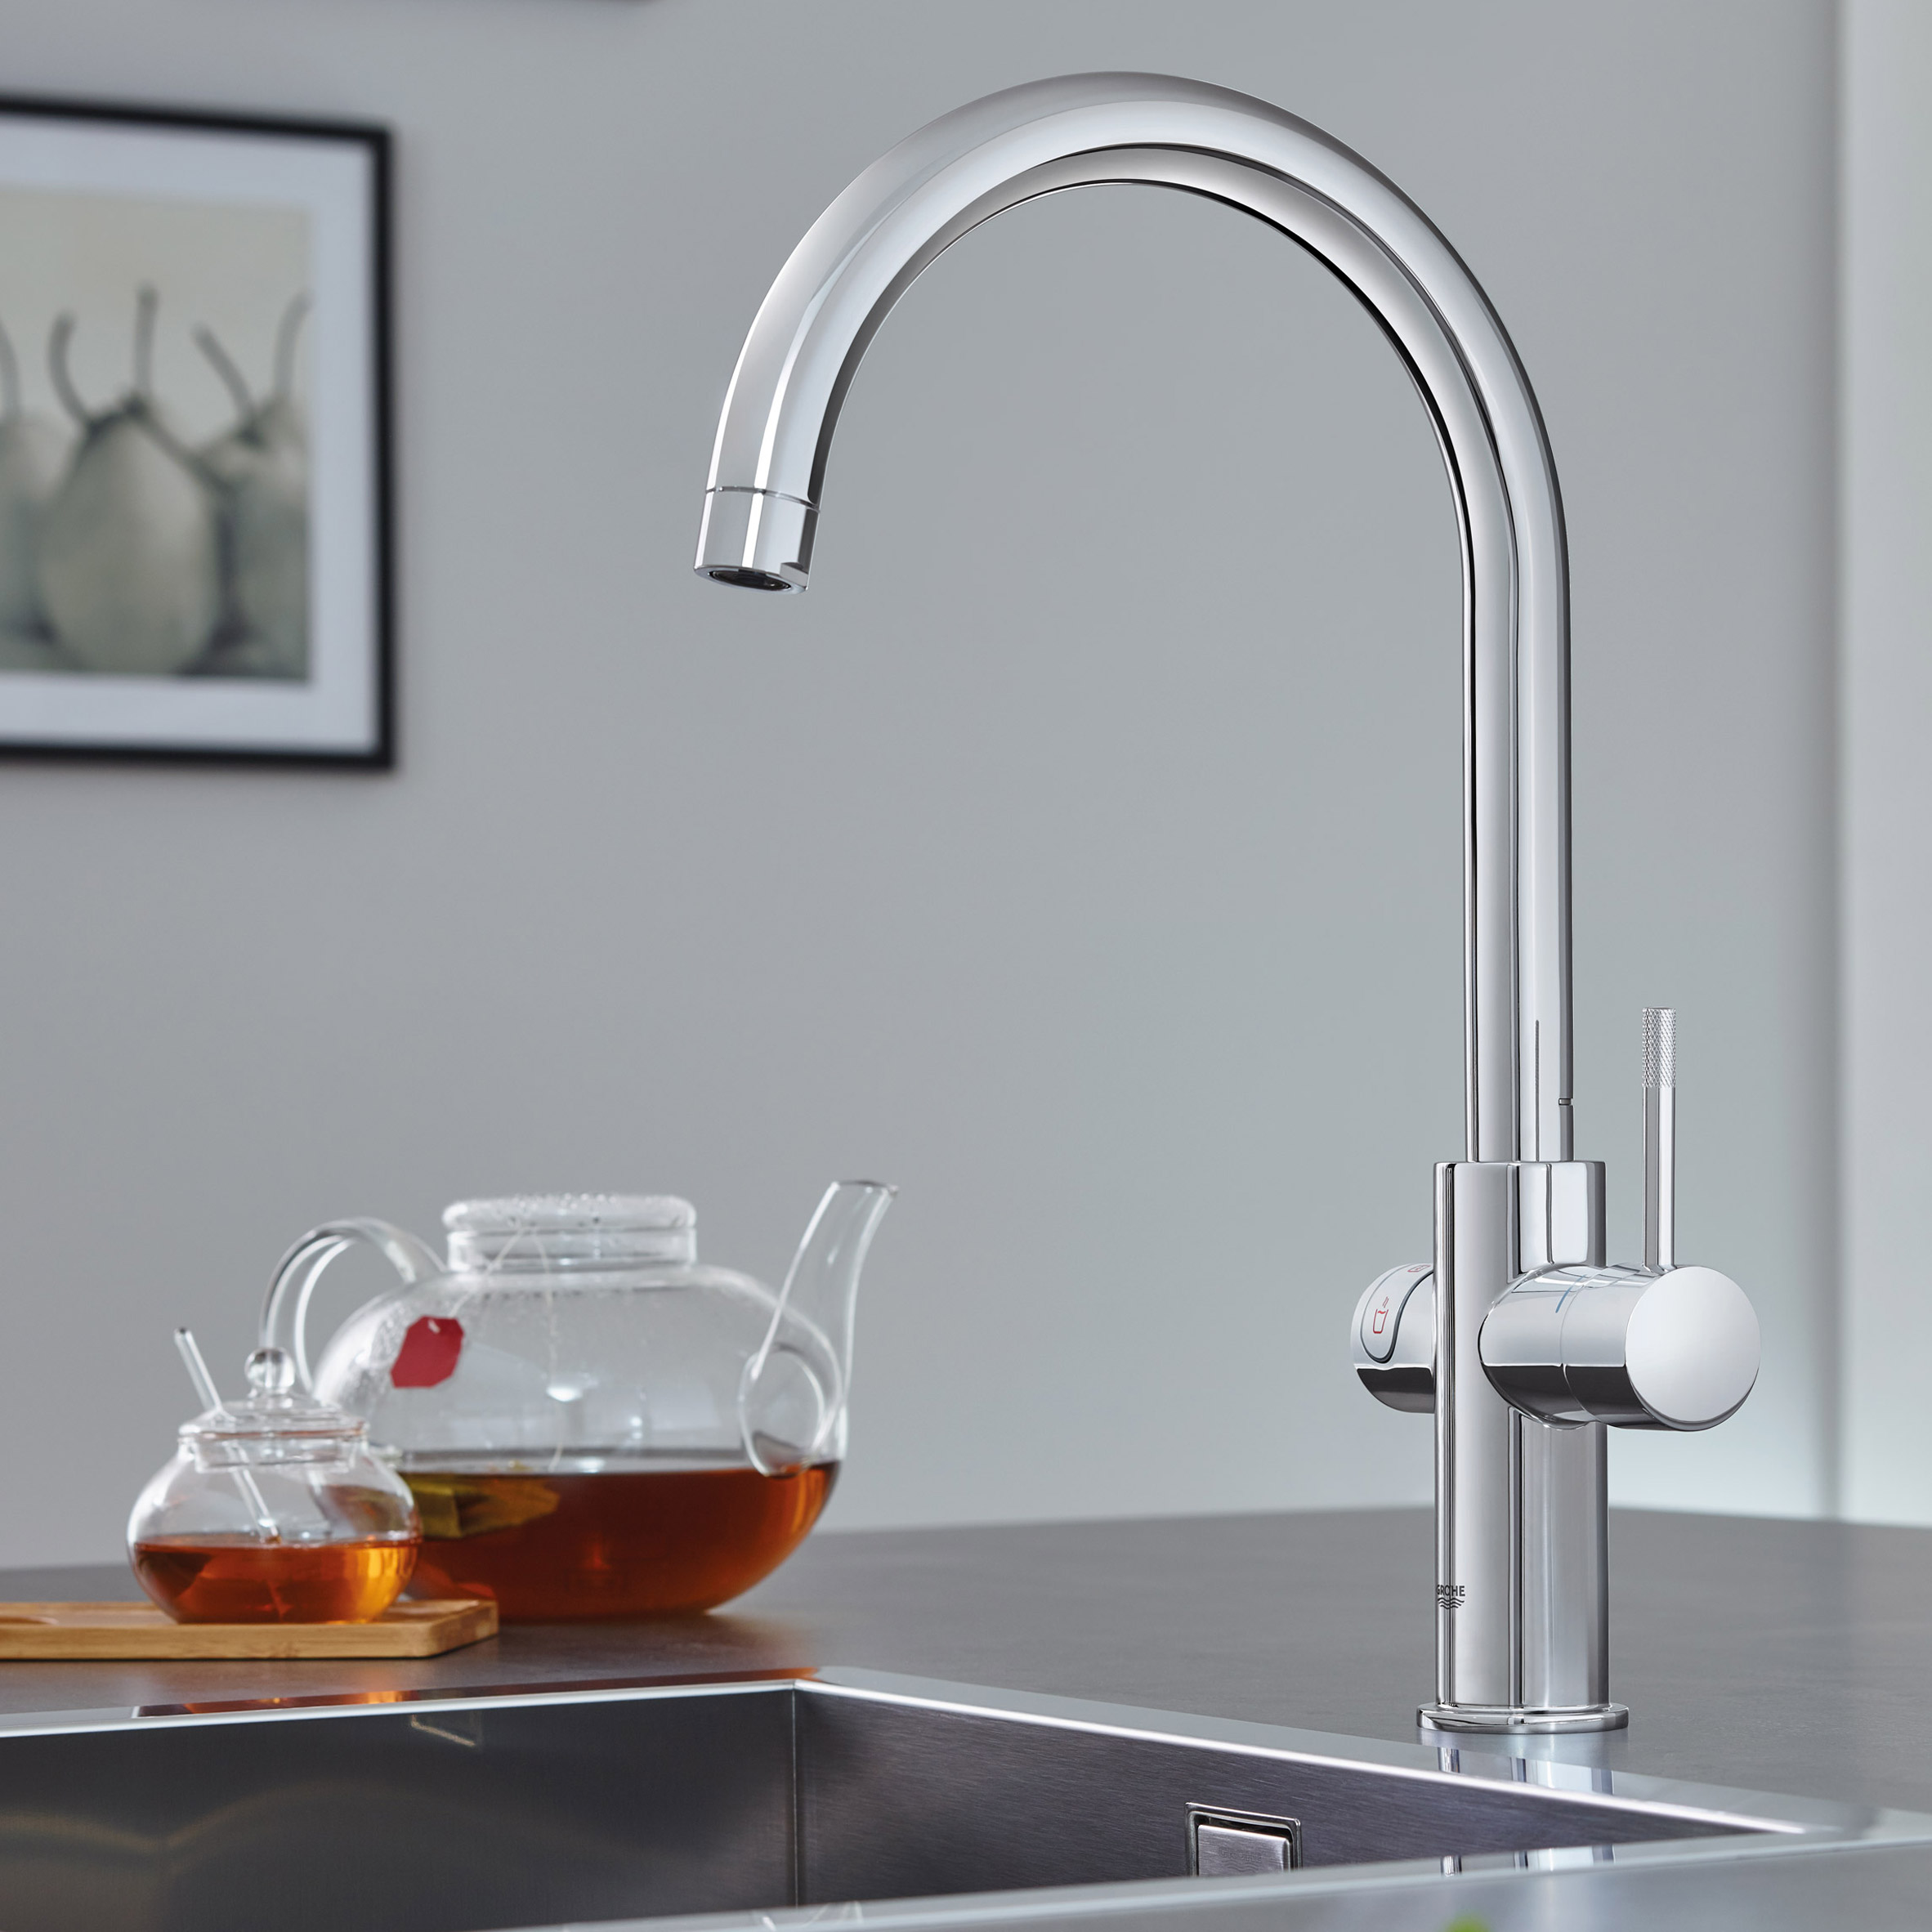 rygrad struktur Michelangelo Grohe's Blue Home and Red taps provide instant boiling or sparkling water